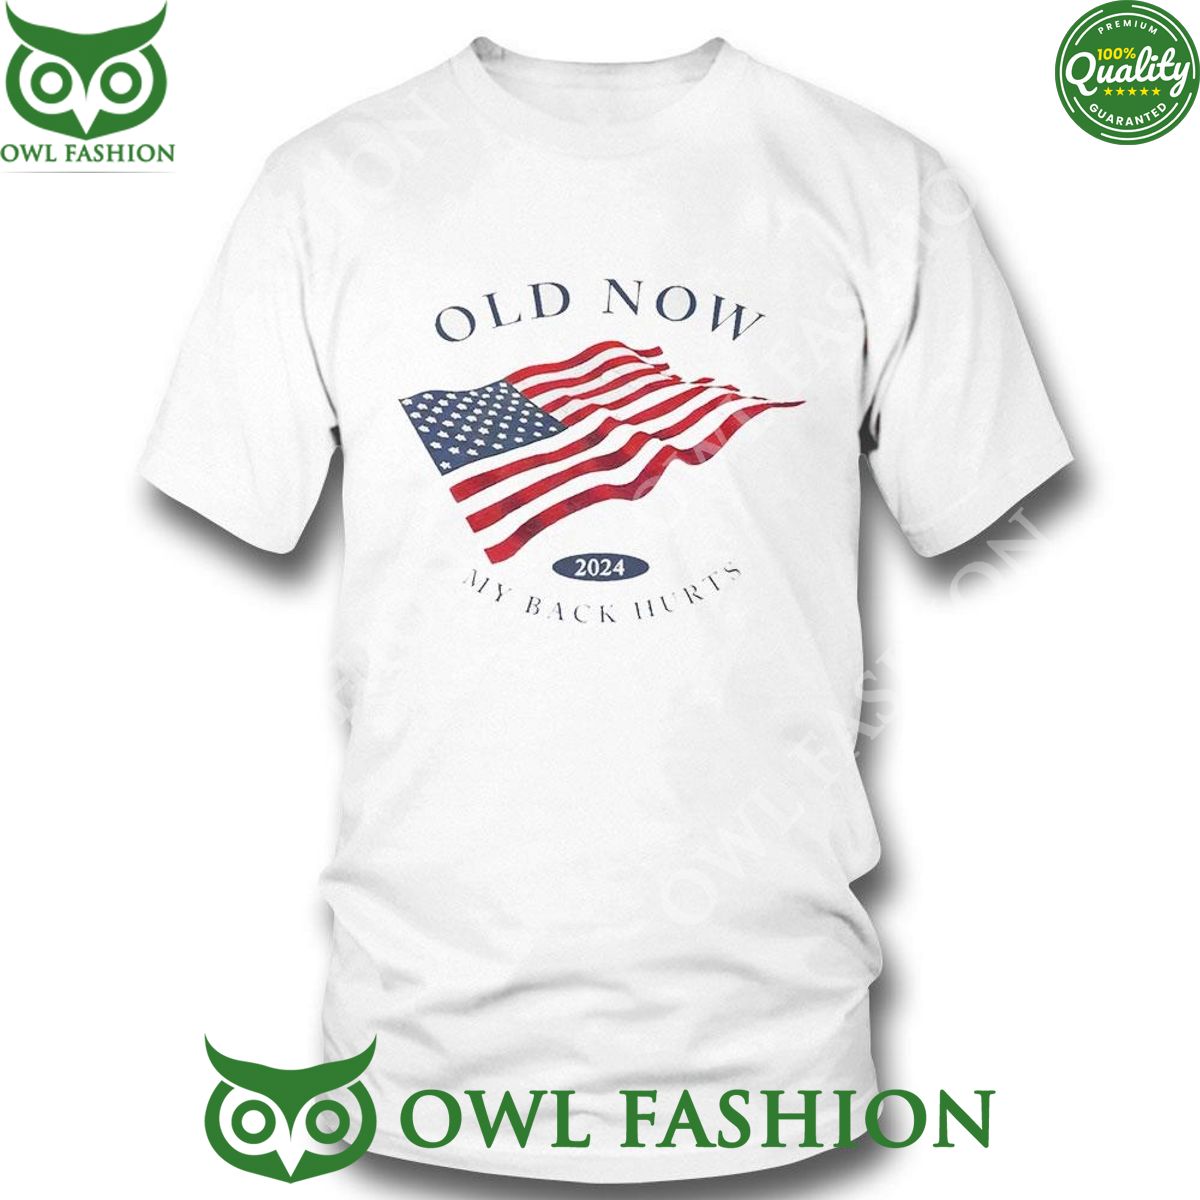 Old Now 2024 My Back Hurts t Shirt